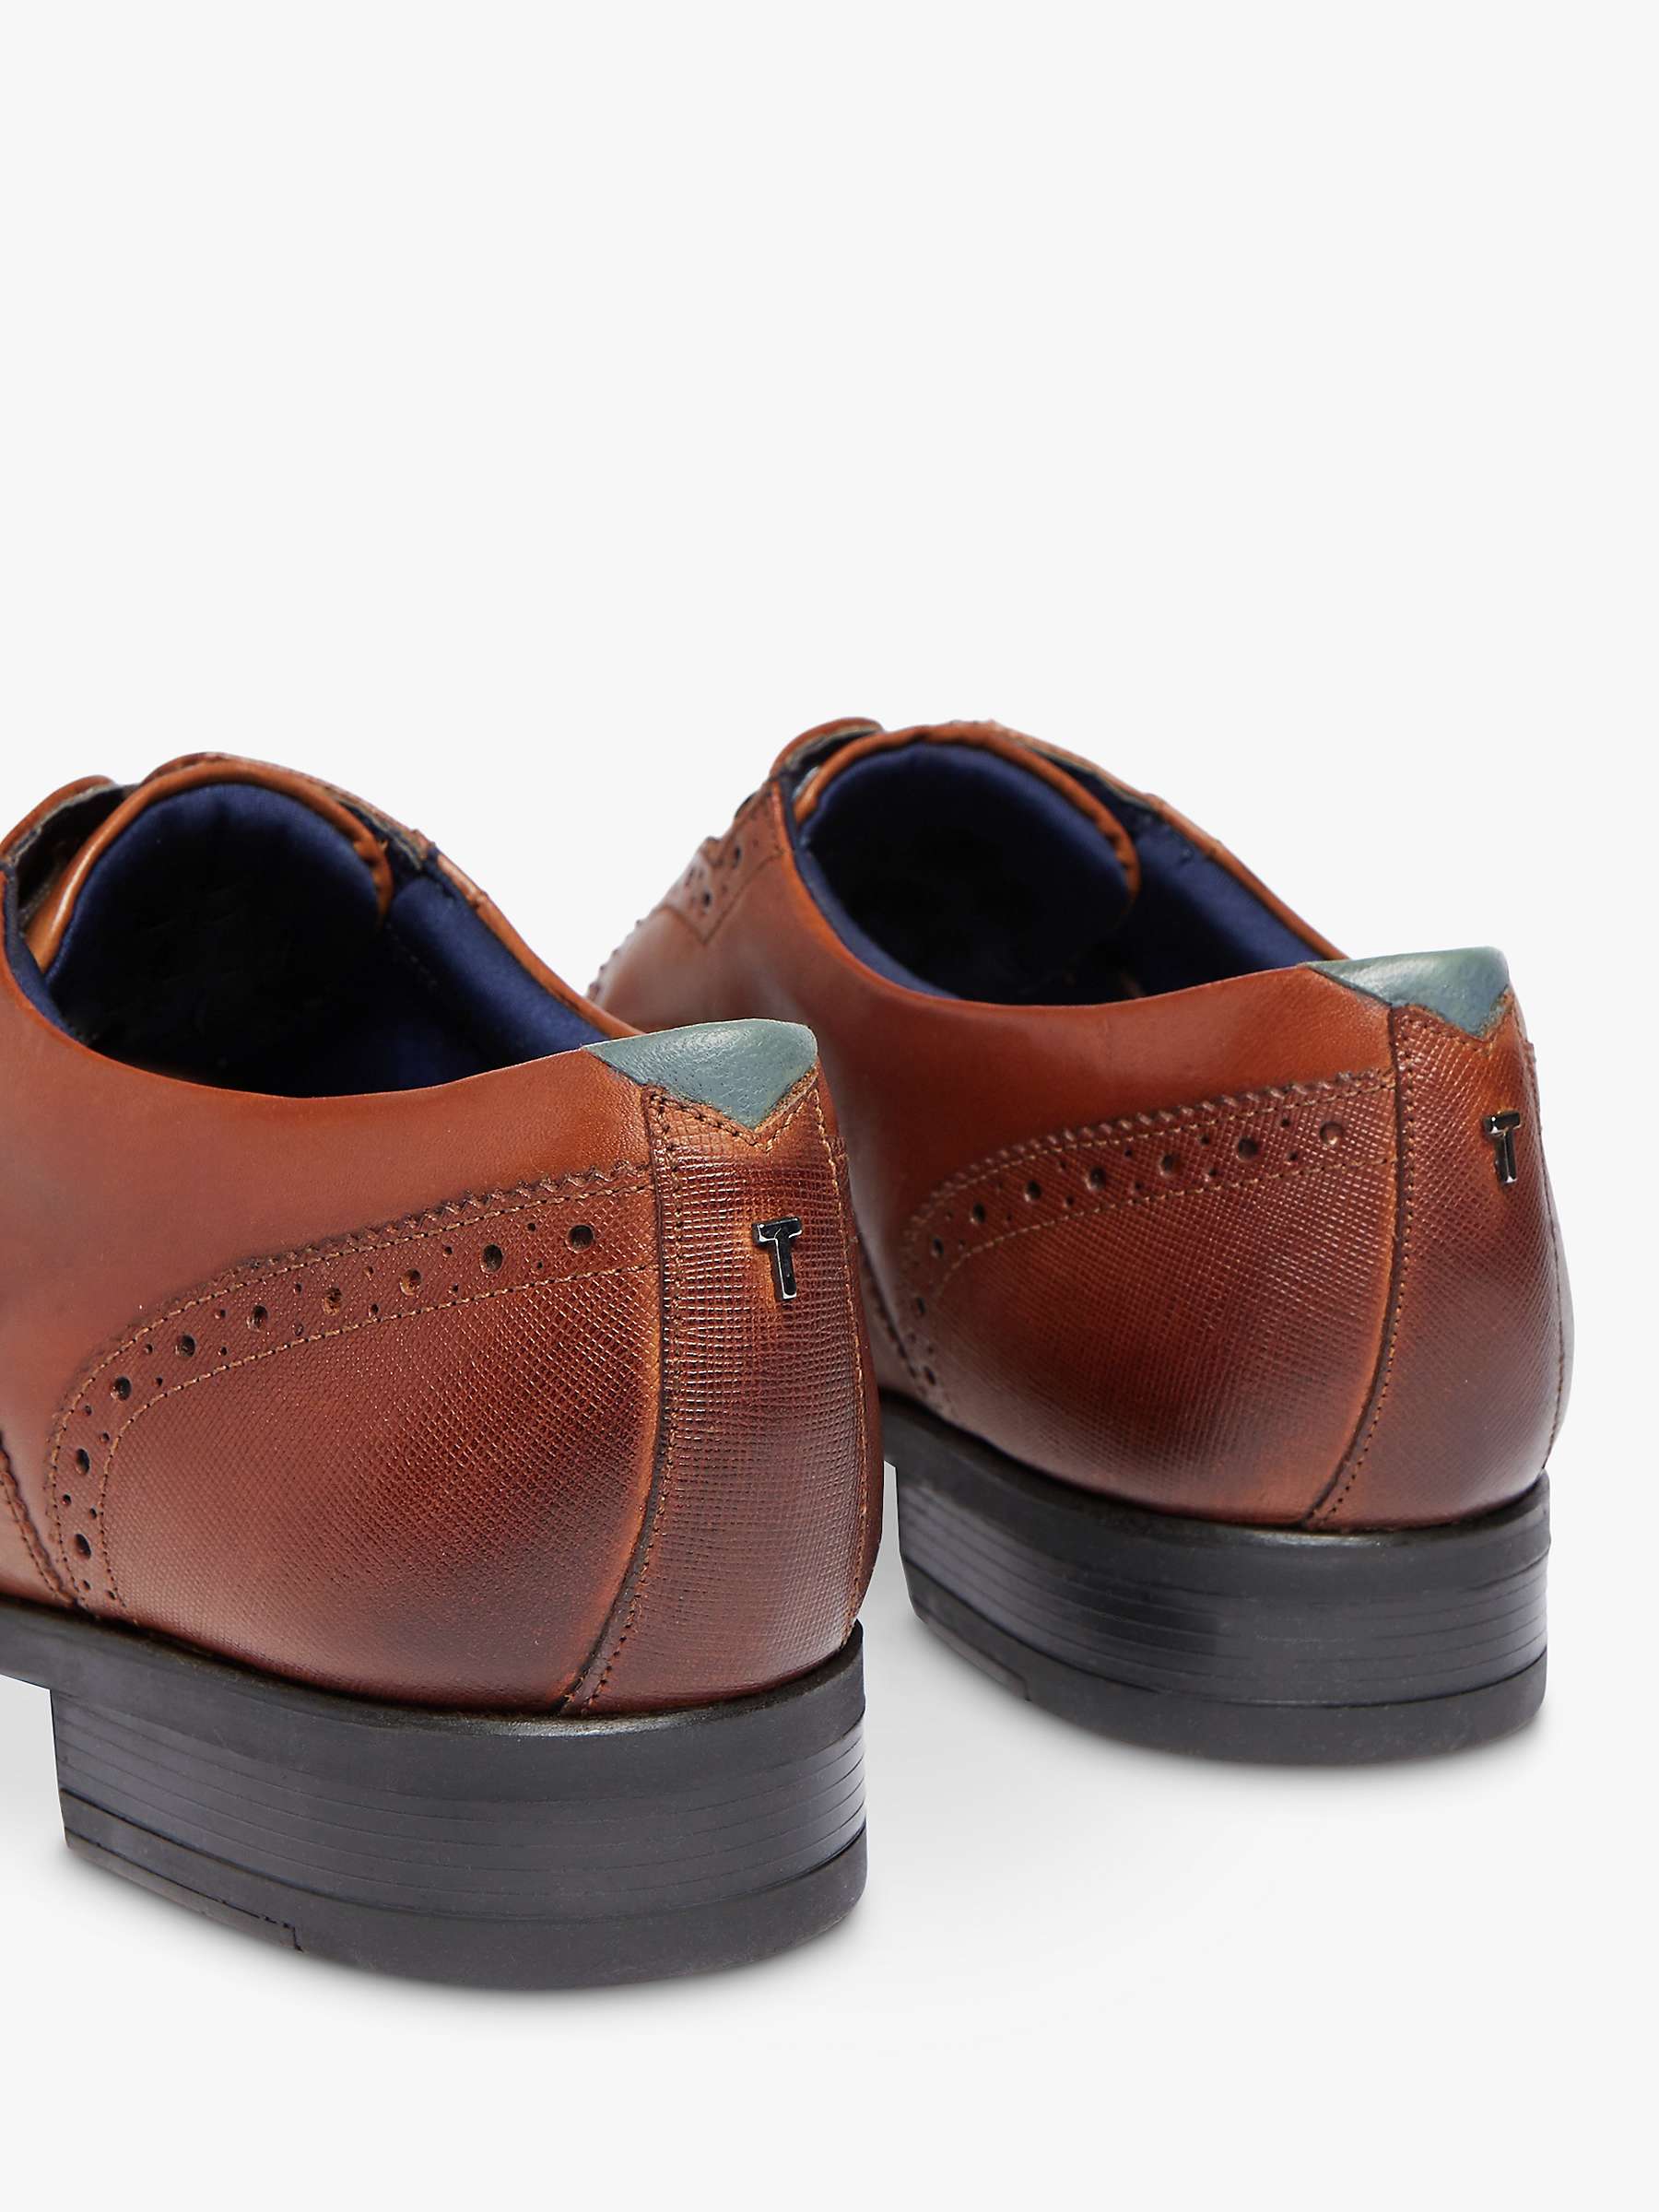 Buy Ted Baker Mittal Leather Brogues, Brown Tan Online at johnlewis.com